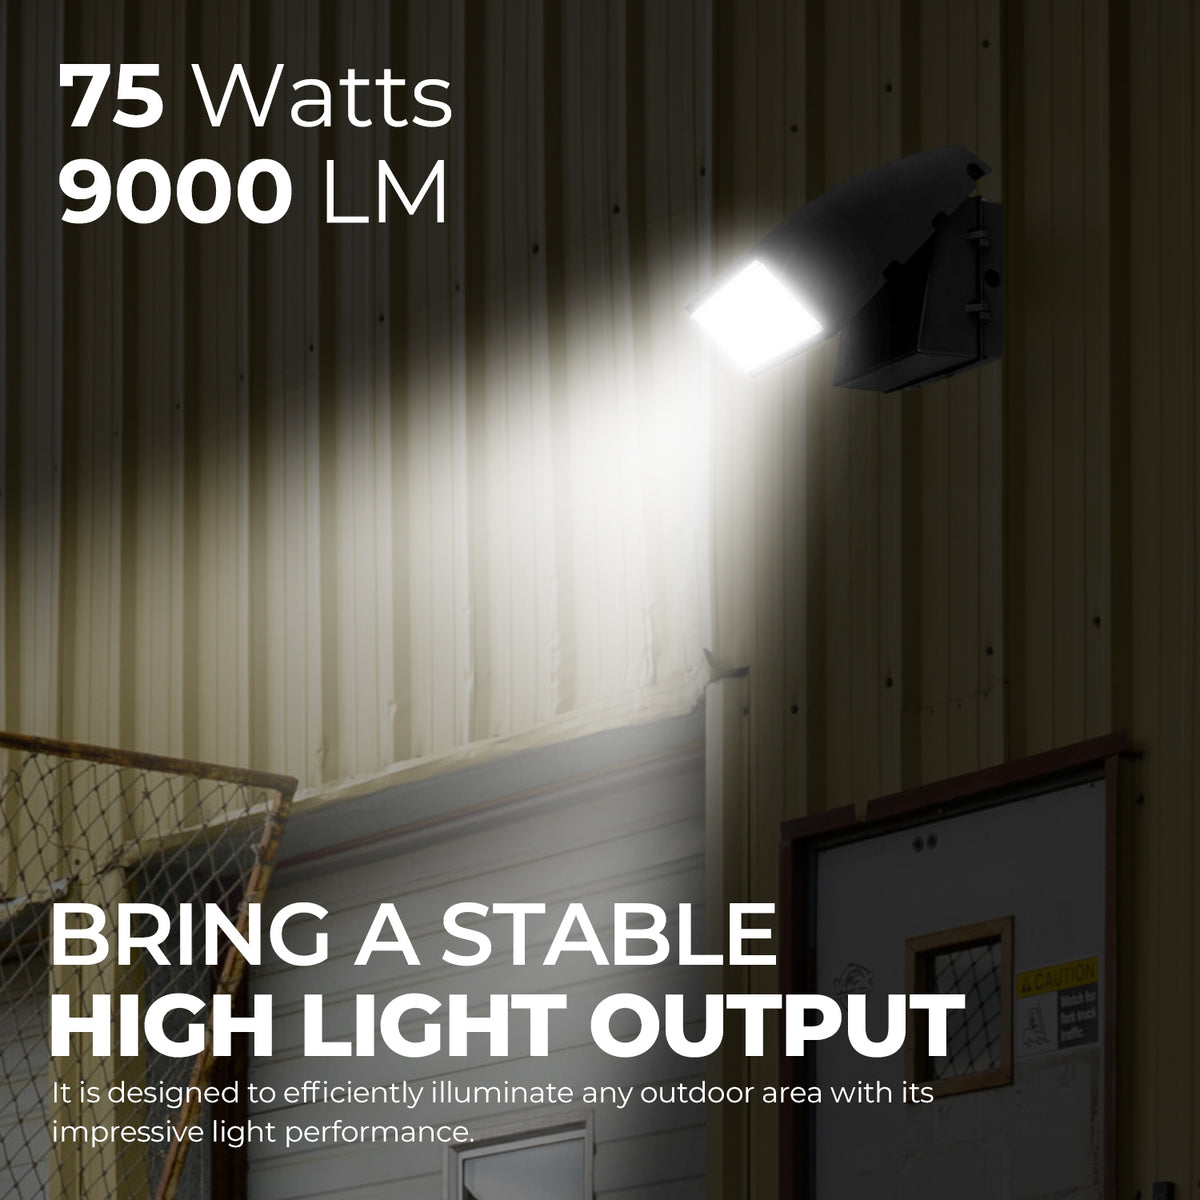 75W LED Wall Pack, 5000K 9000LM, Dusk-to-dawn Photocell, Adjustable Head, Full Cut-off Security Light, ETL listed